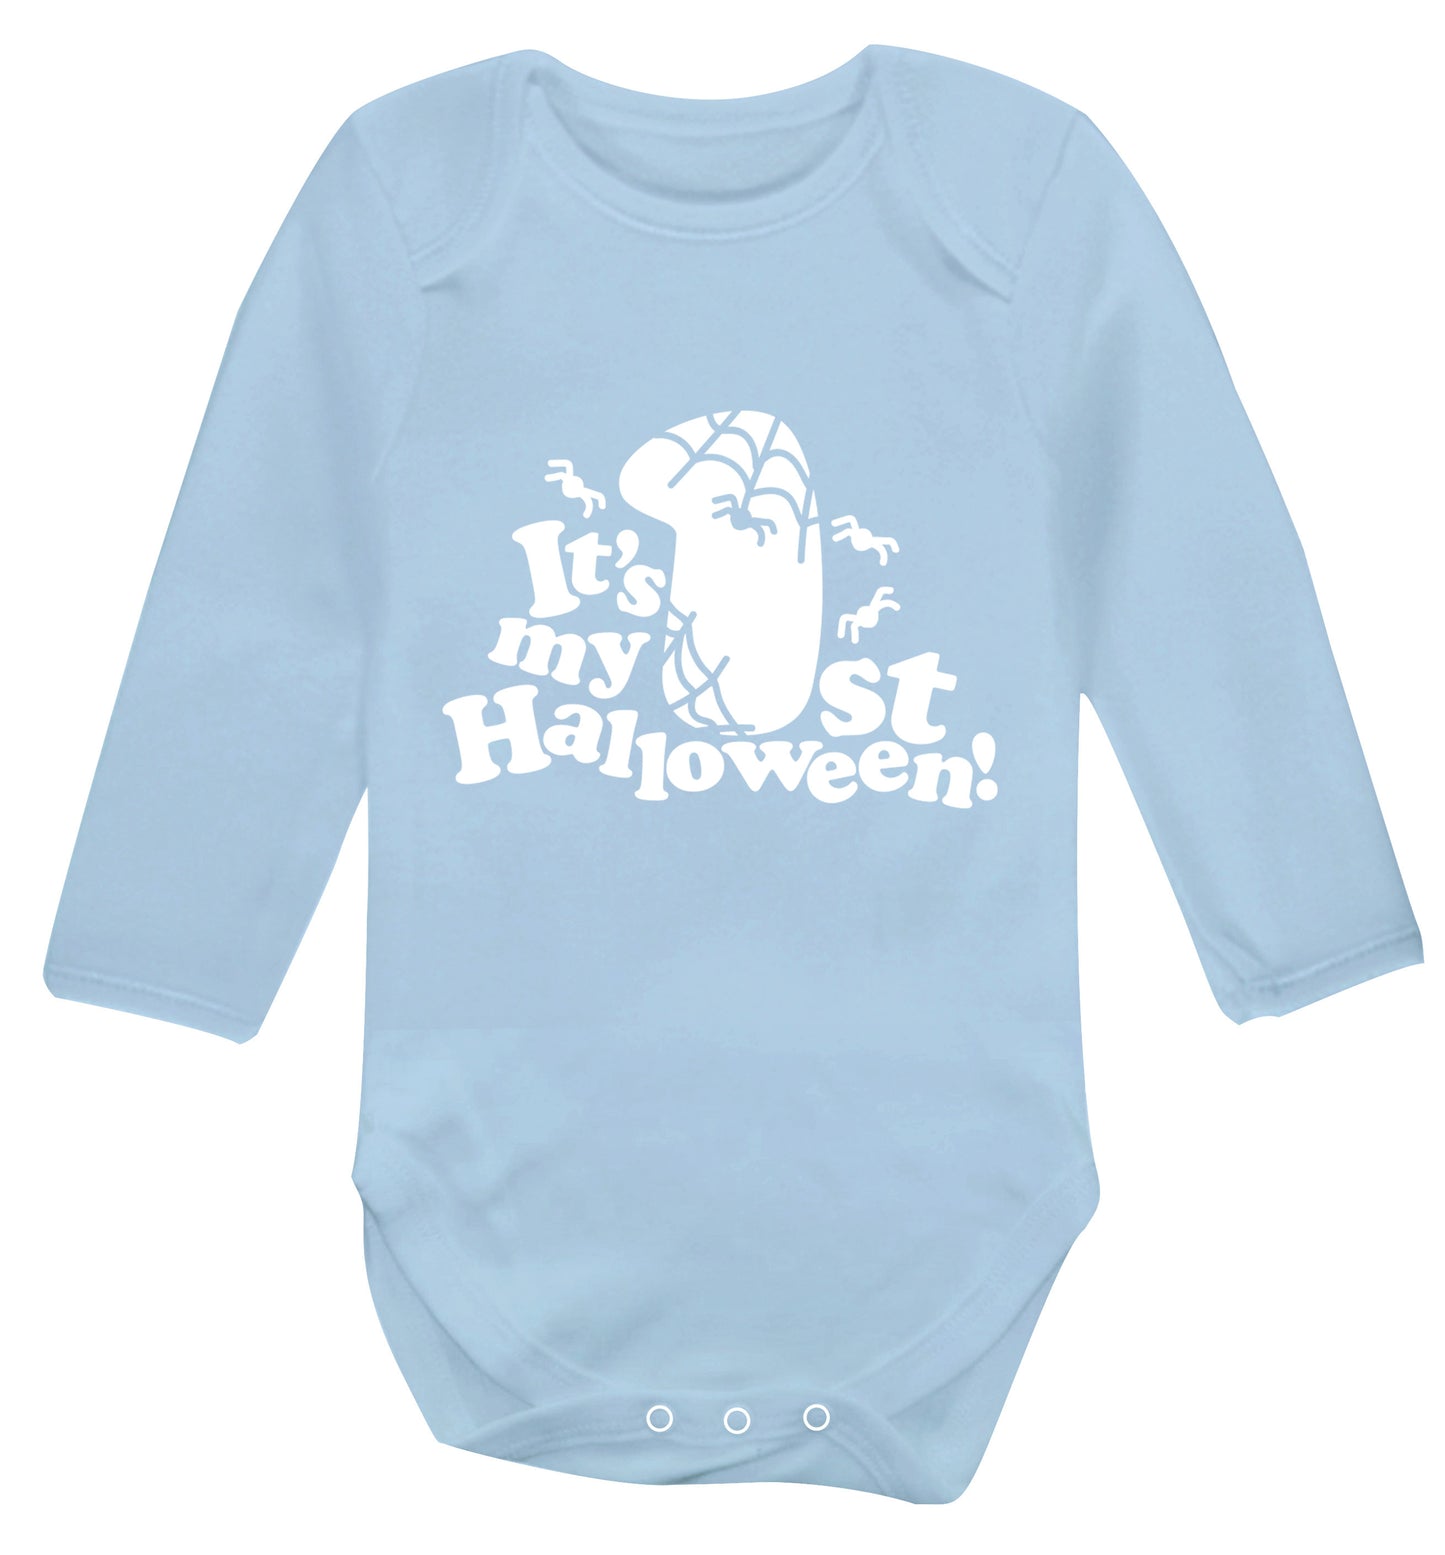 1st Halloween Baby Vest long sleeved pale blue 6-12 months